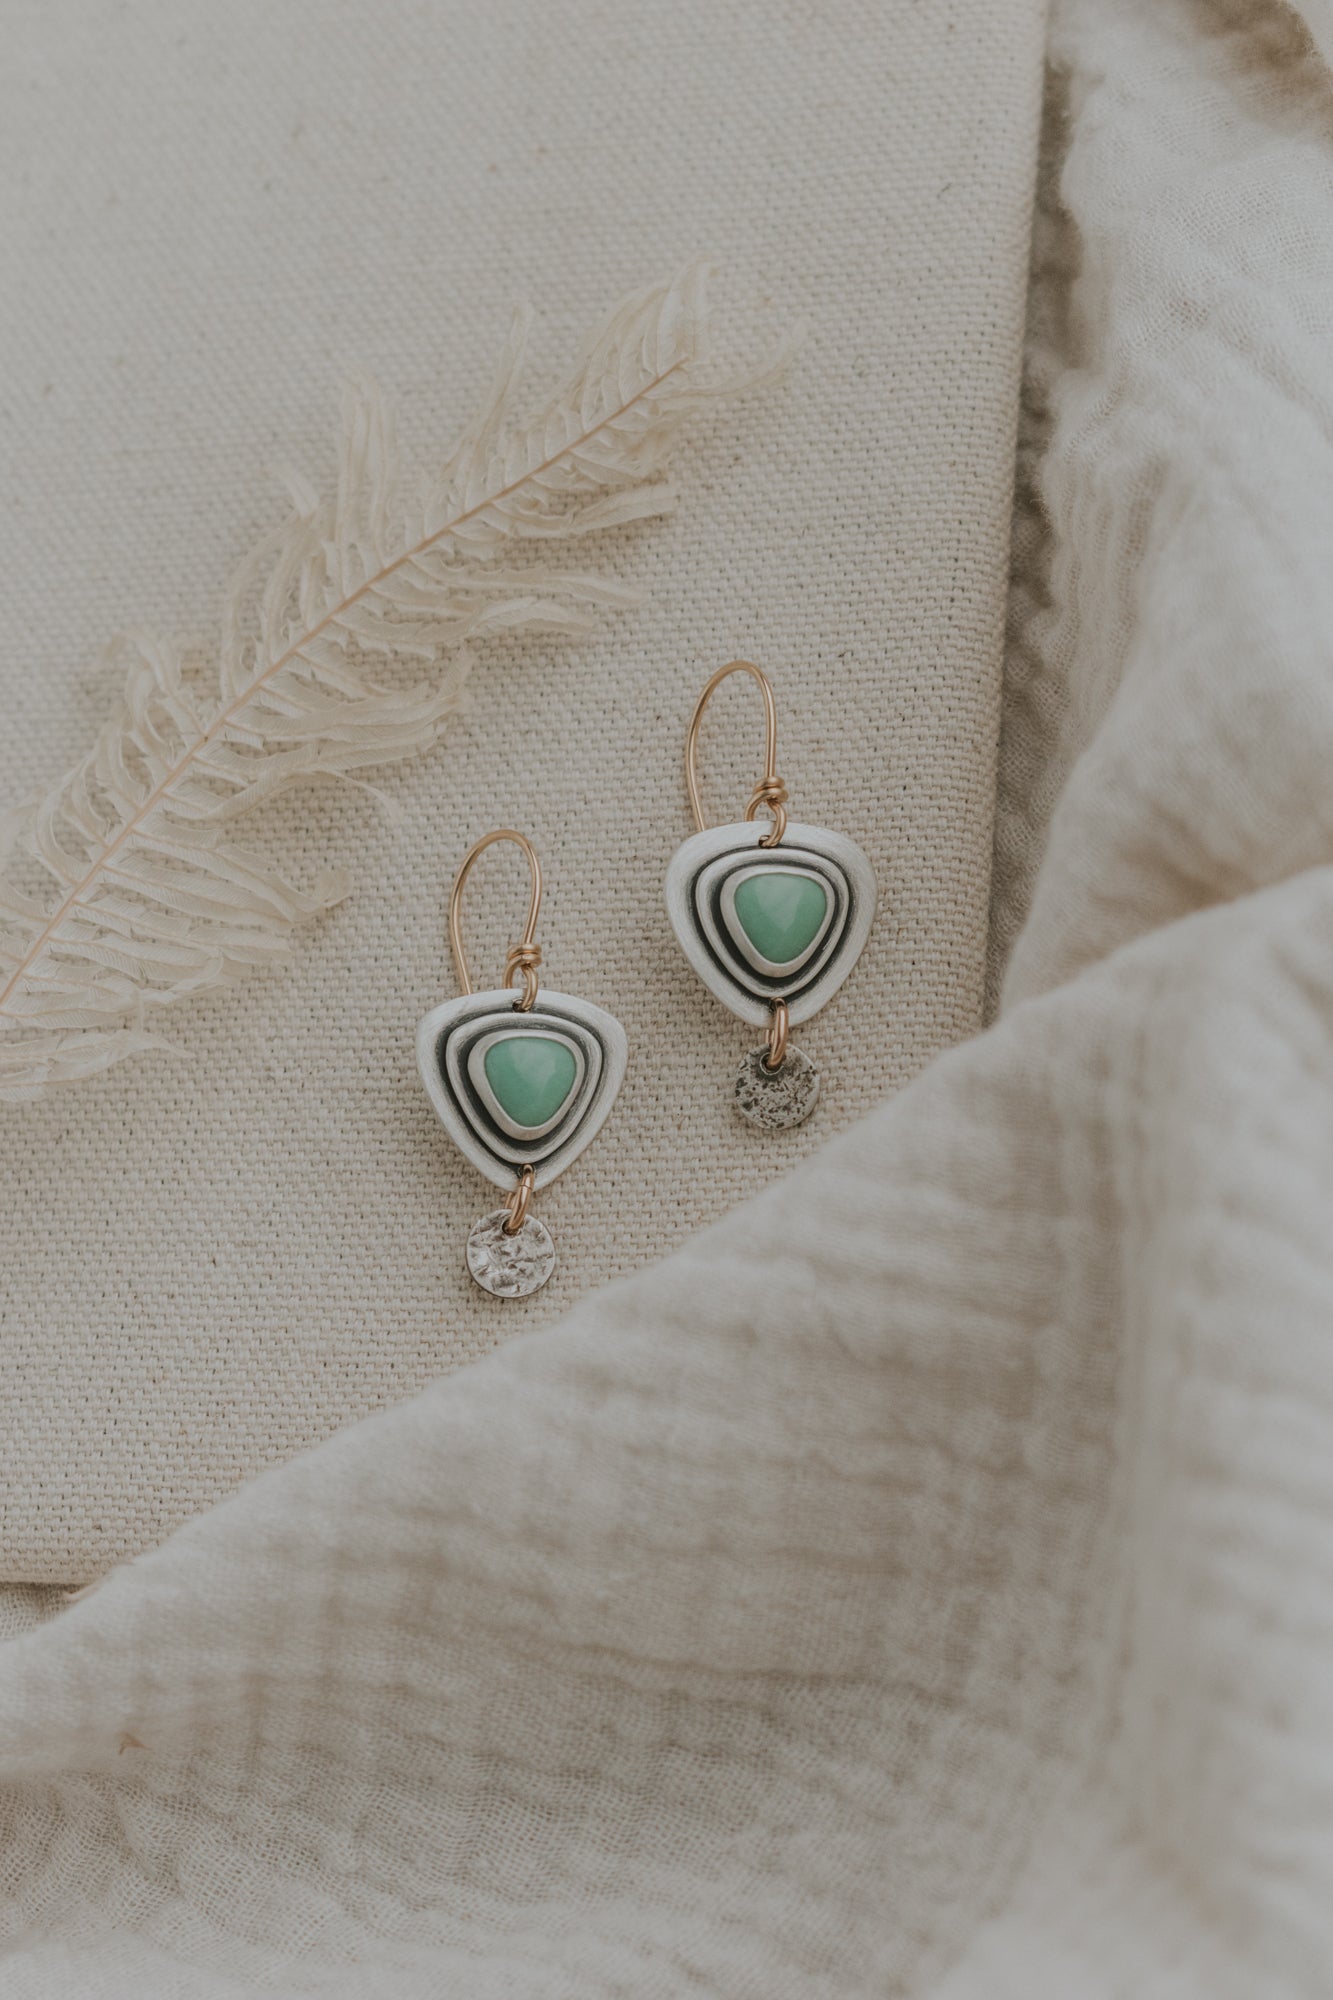 Variscite Triangles + Silver Dot Earrings with Gold-Filled Earwires - Third Hand Silversmith LLC handmade jewelry, Bozeman, Montana